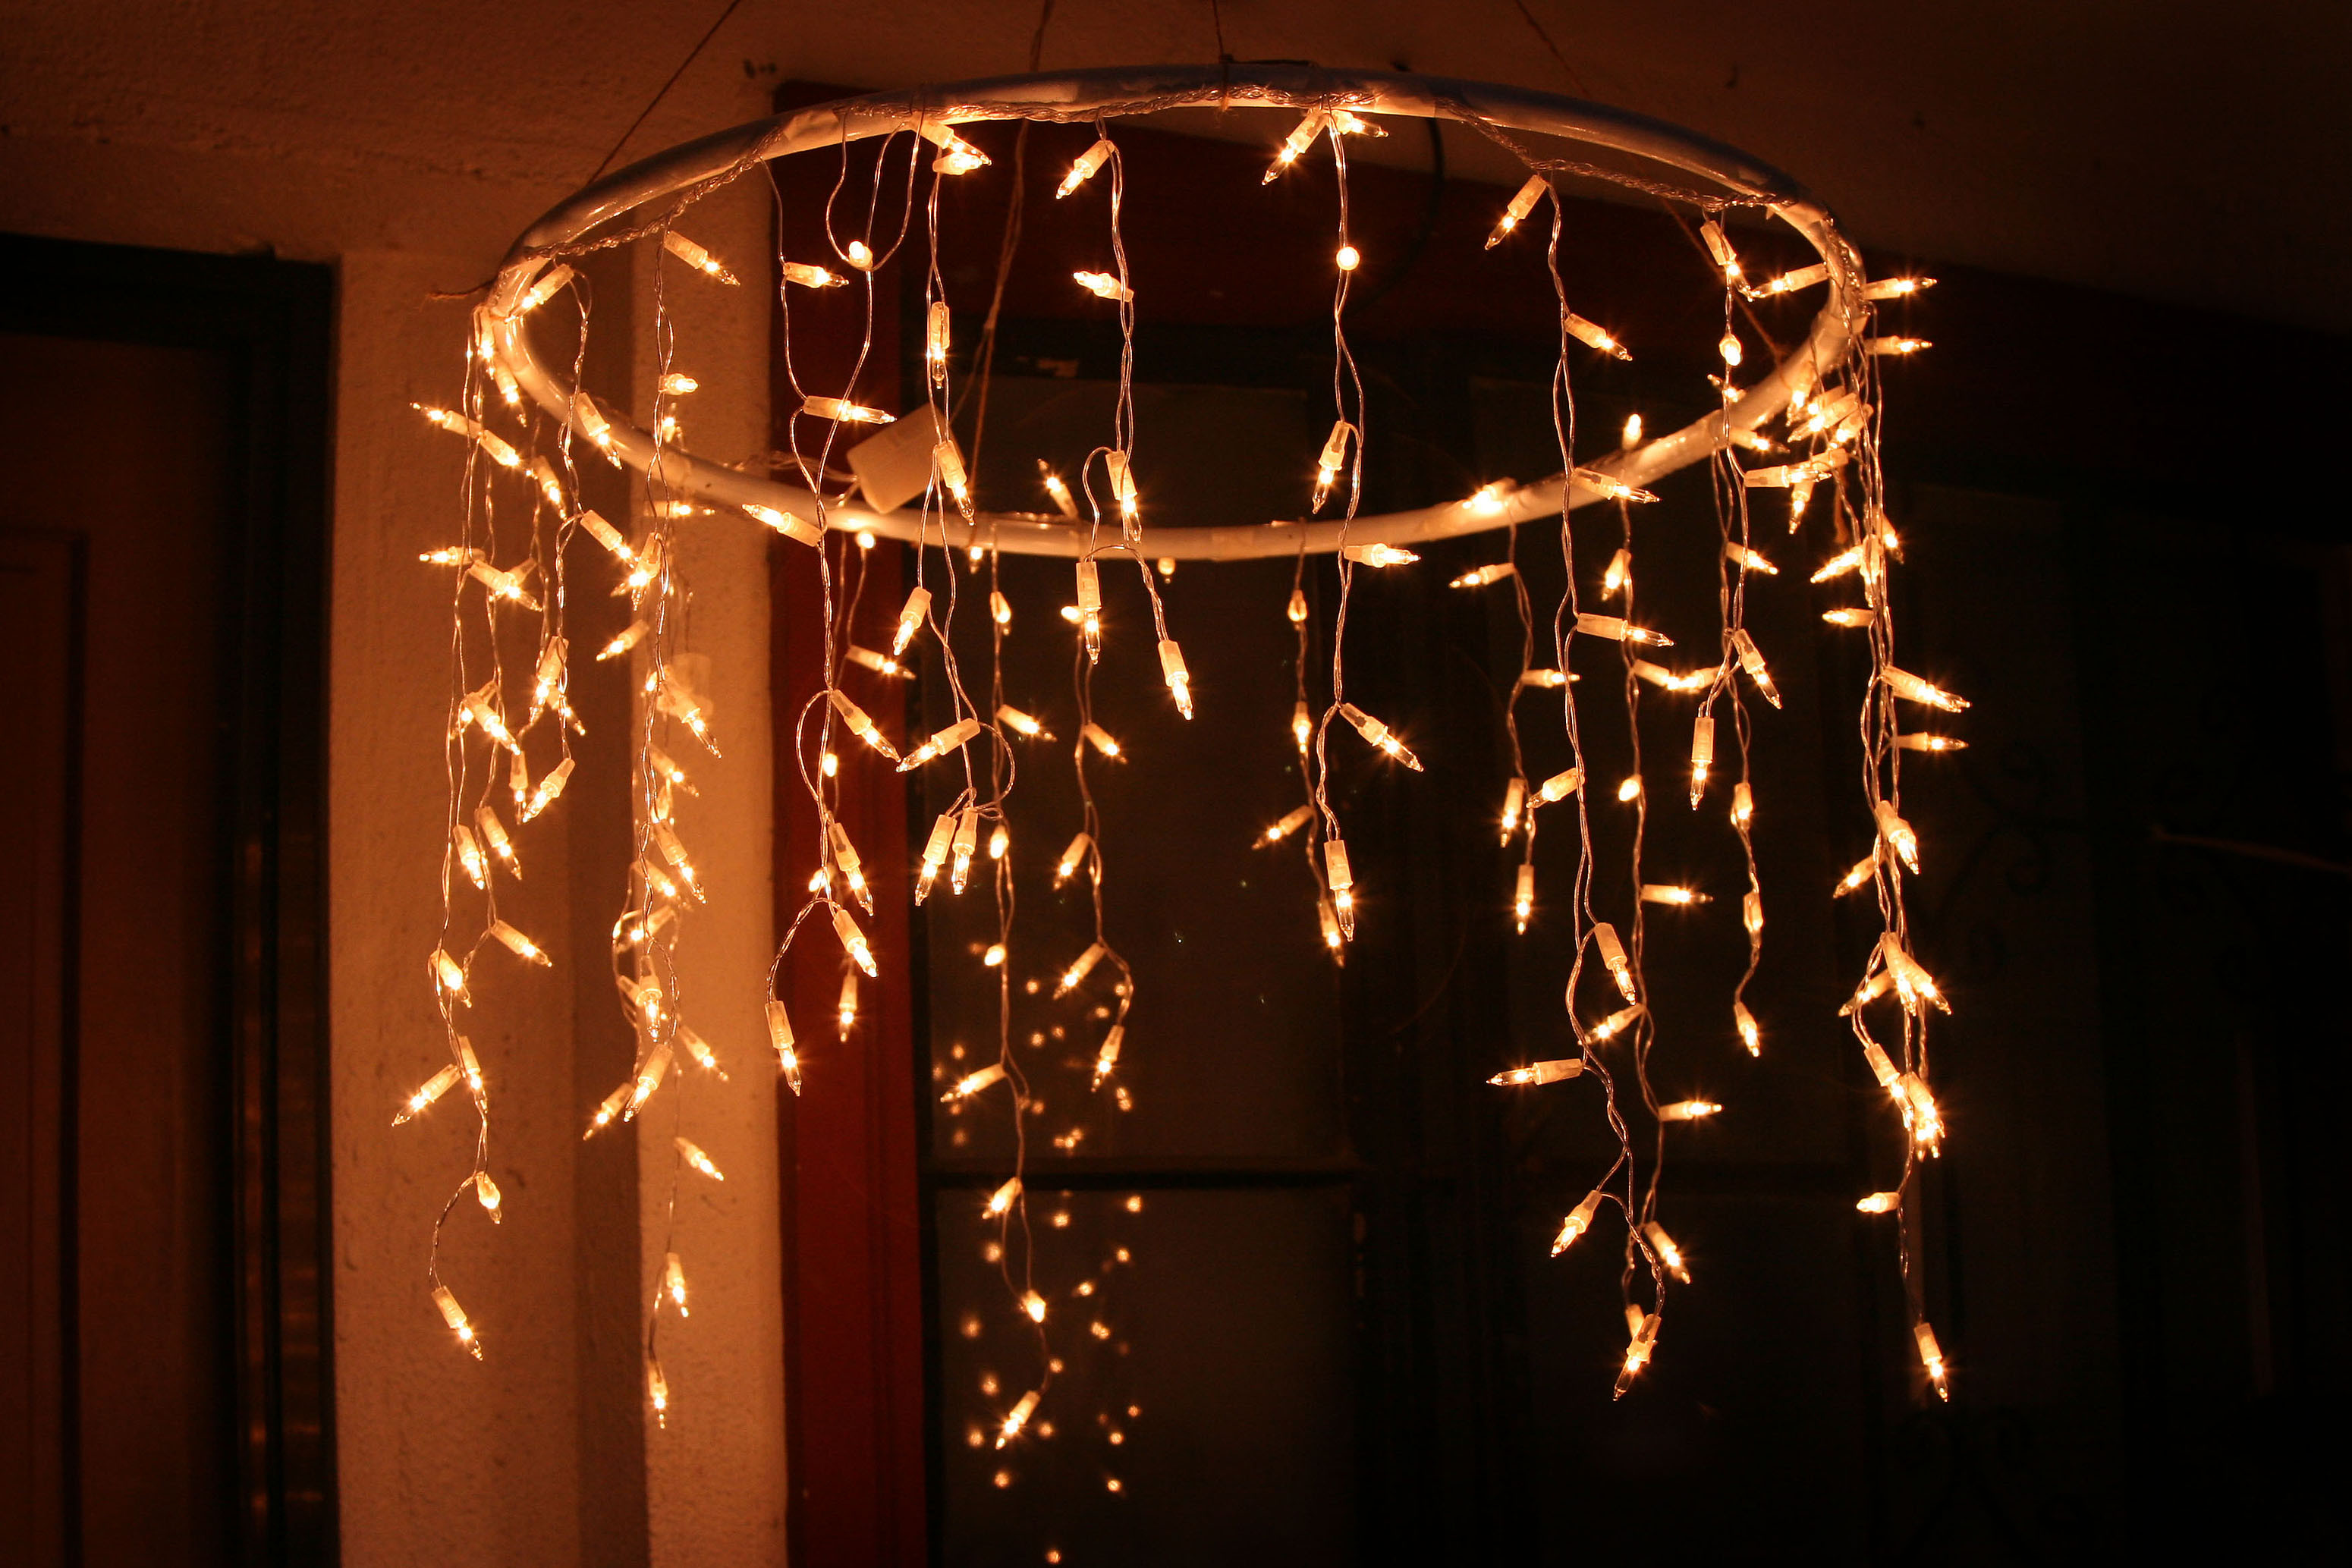 Porch Christmas Lights
 How to Make an Outdoor Chandelier with Icicle Christmas Lights